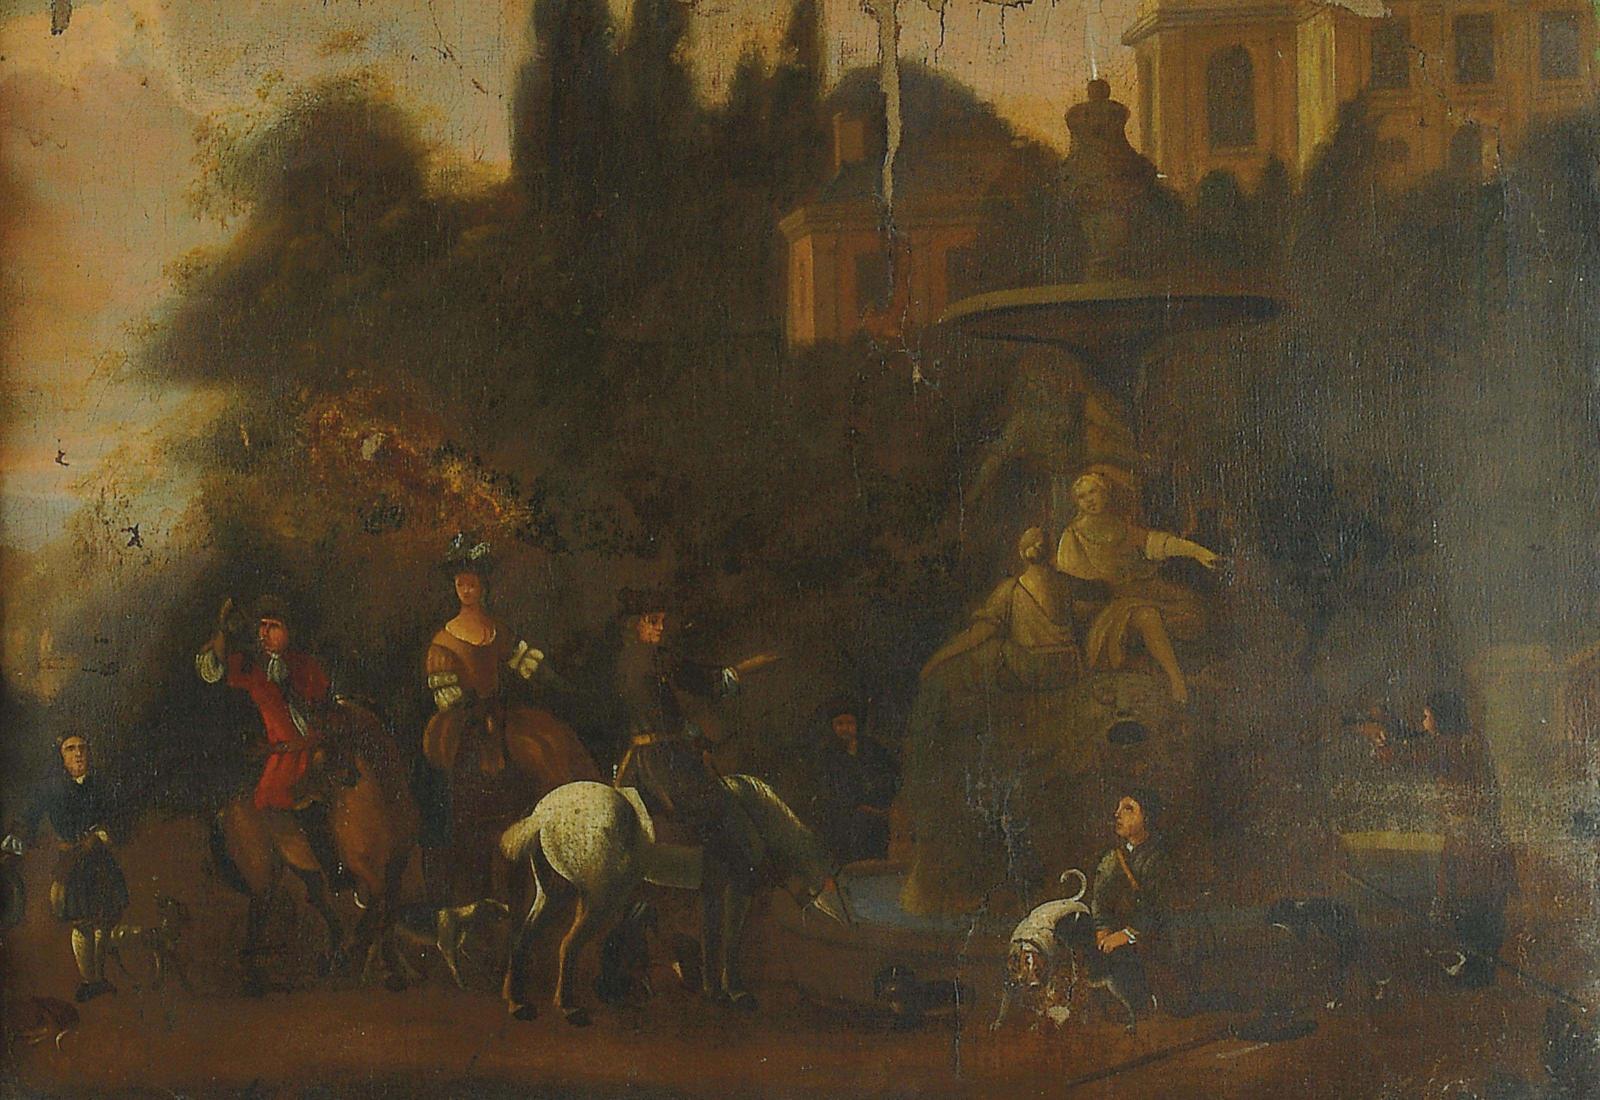  A hawking party at rest before an Italiante fountain - Manner of Dirck Stoop (c.1615-1686)